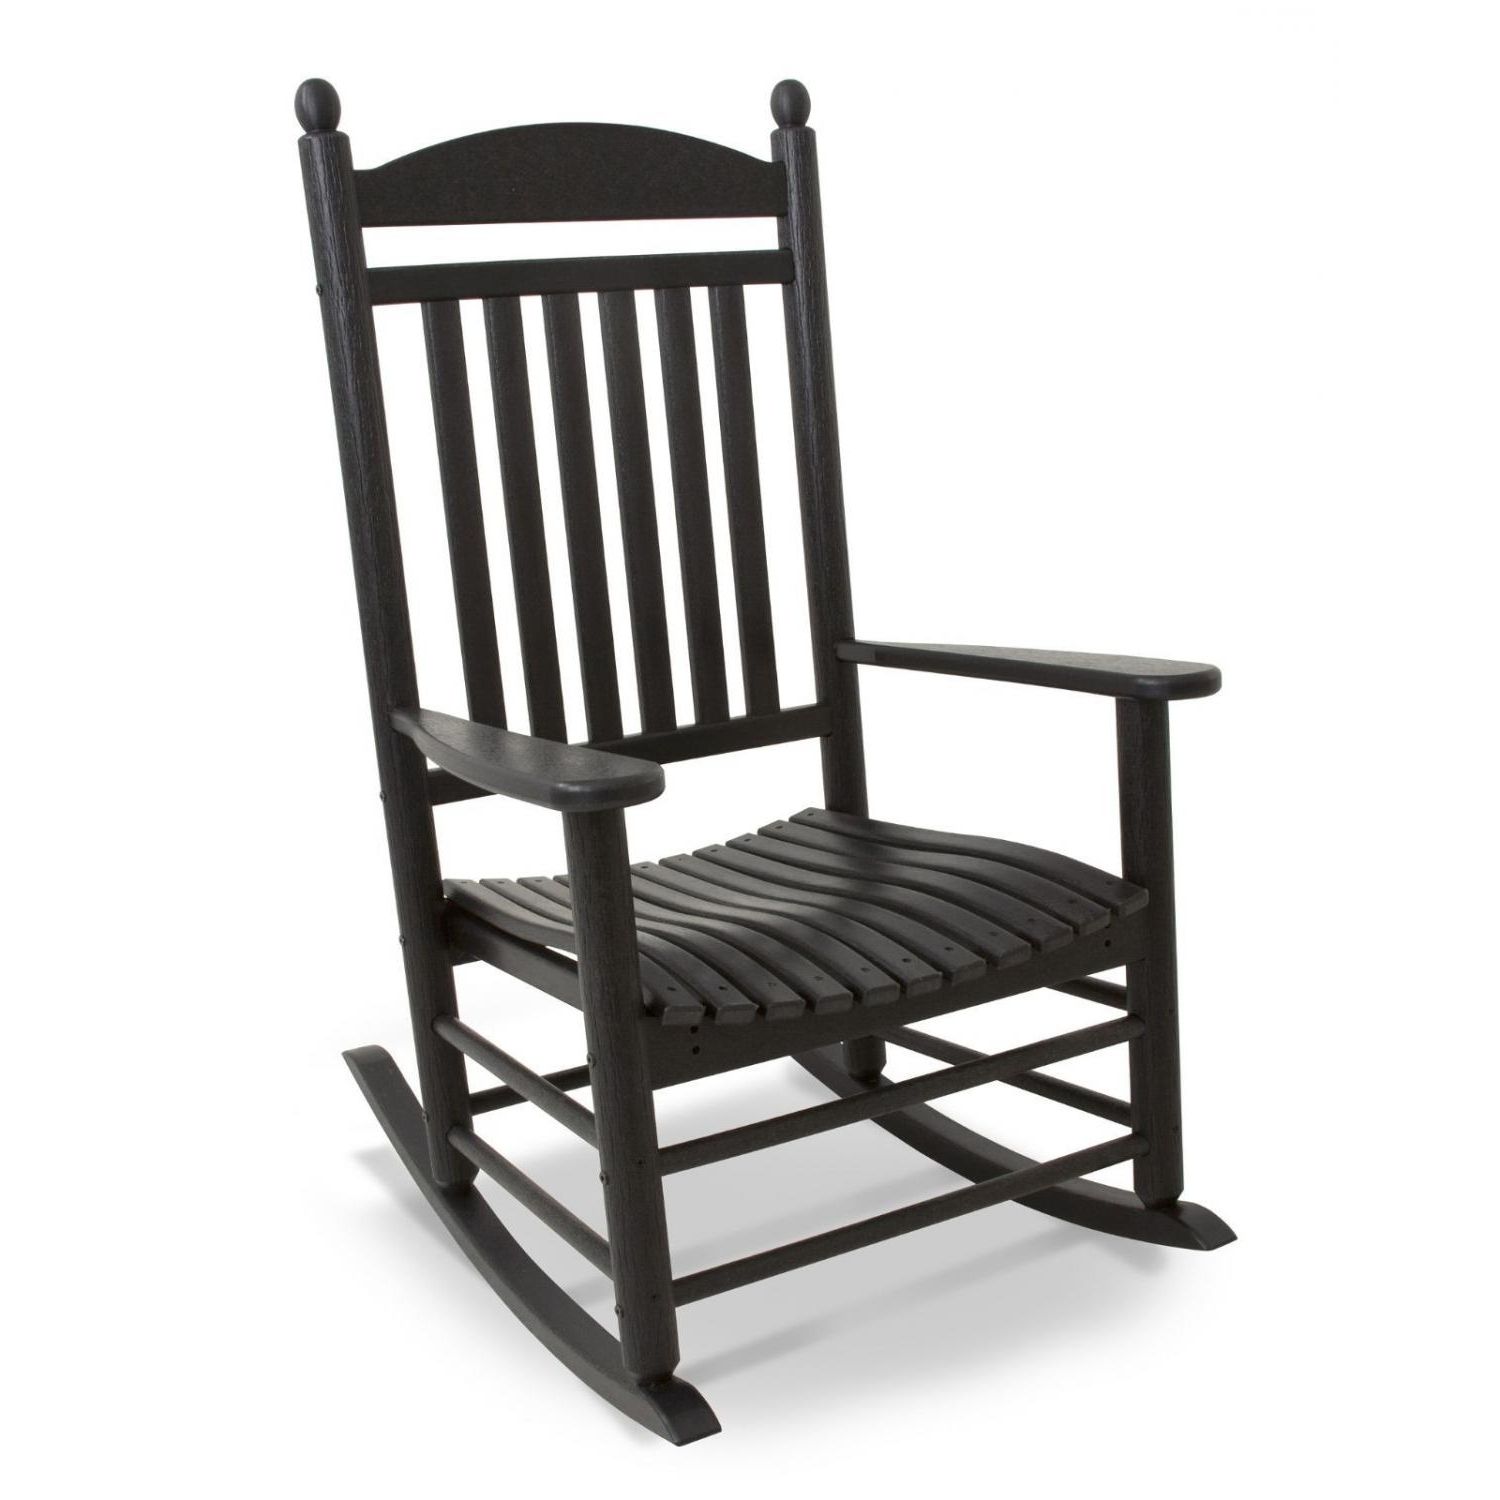 Popular Polywood Jefferson 3 Piece Recycled Plastic Wood Patio Rocking Chair In Wooden Patio Rocking Chairs (View 10 of 20)